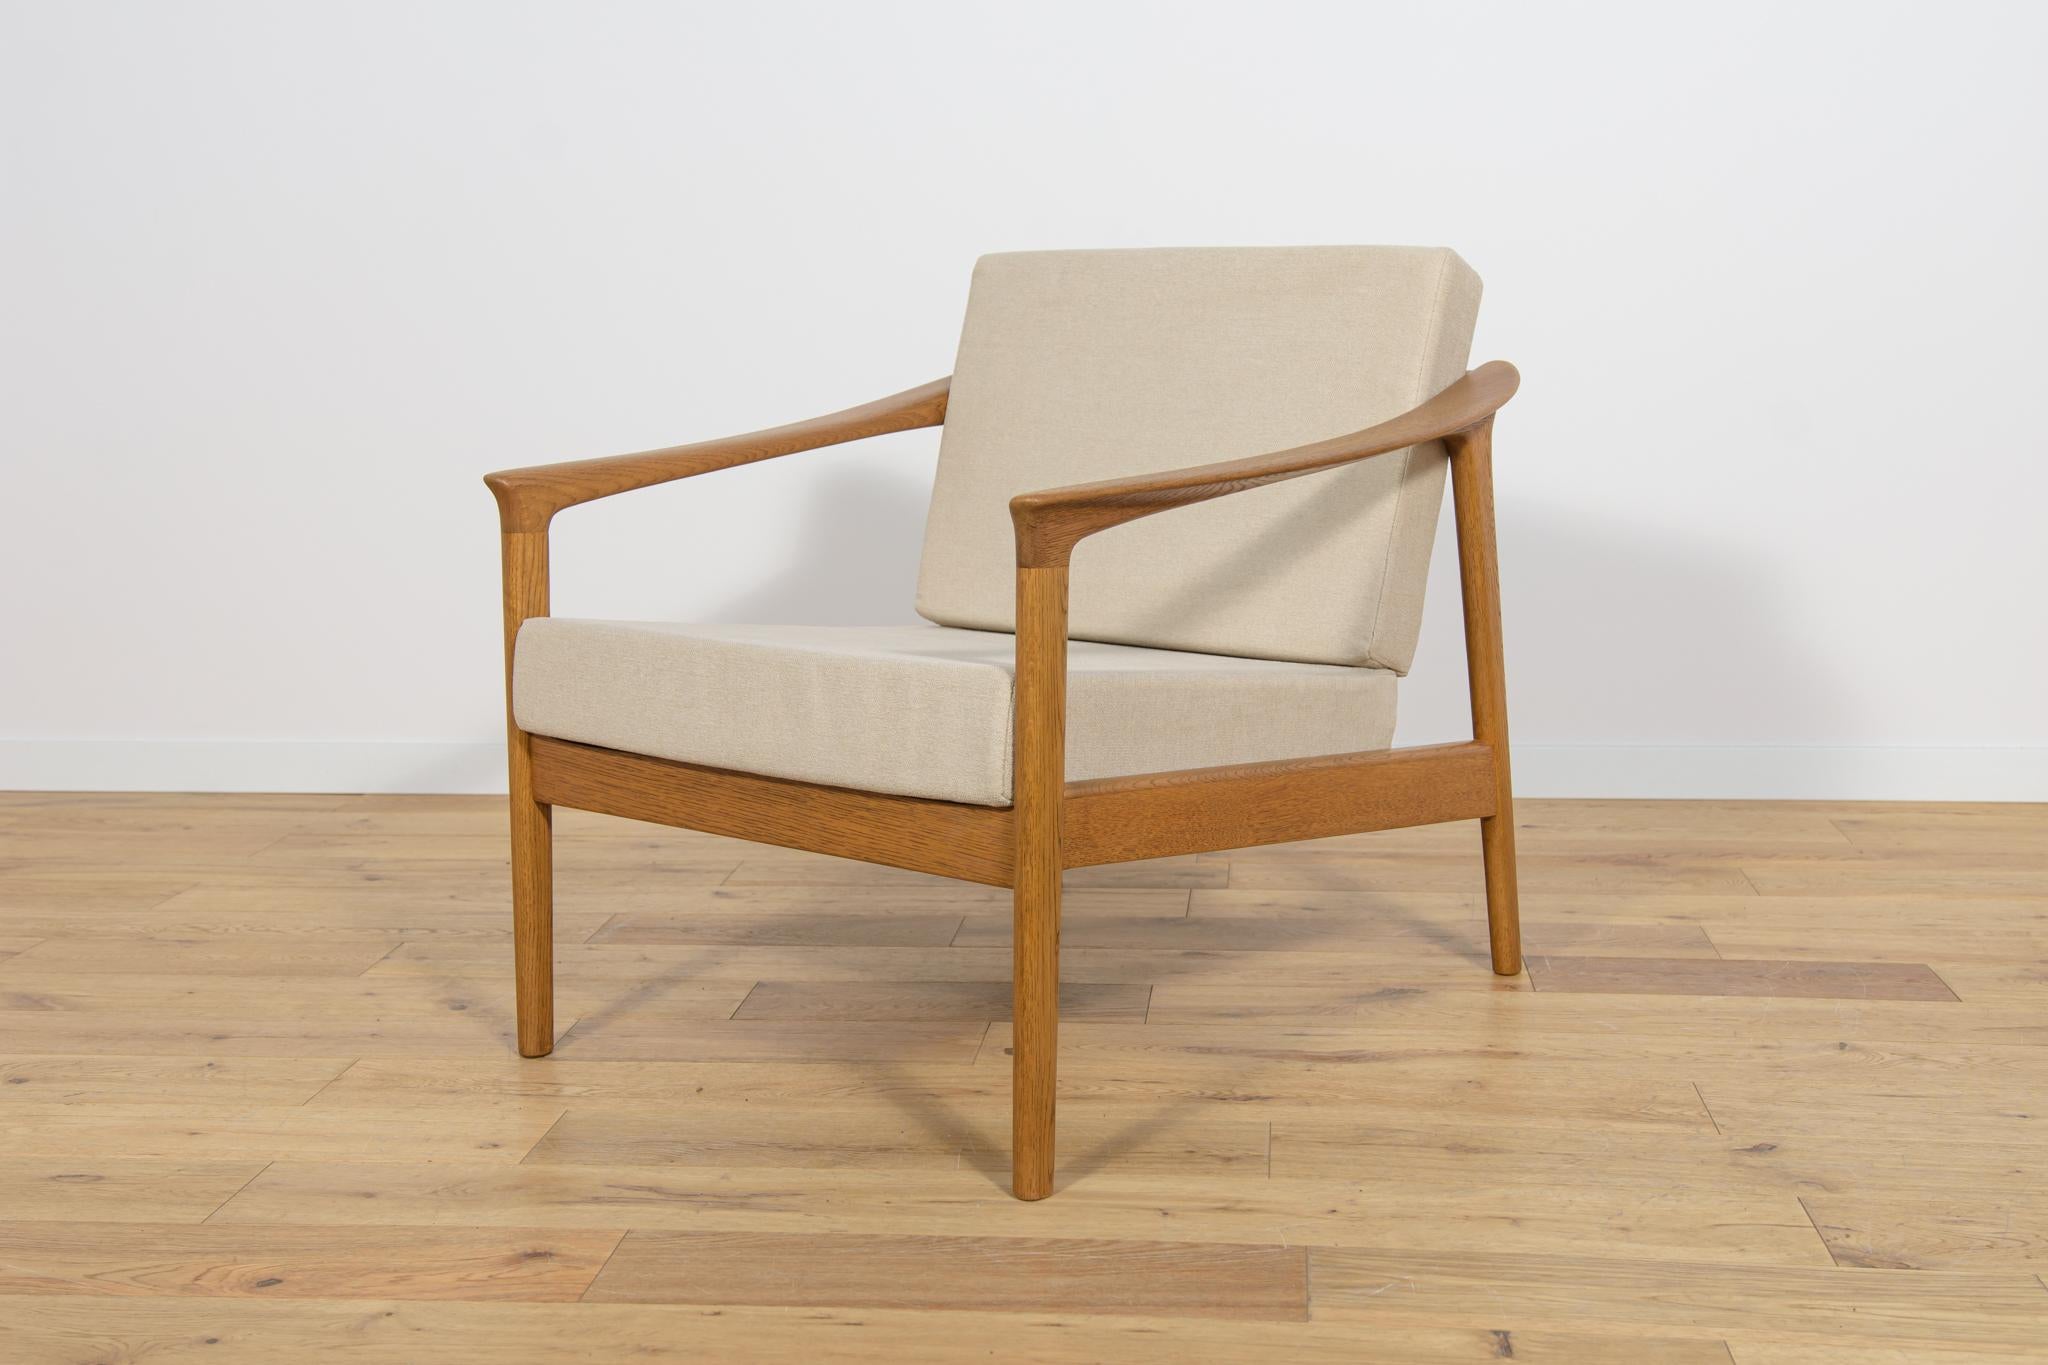  Mid Century Armchair Monterey /5-161 by Folke Ohlsson for Bodafors, 1960. In Excellent Condition For Sale In GNIEZNO, 30